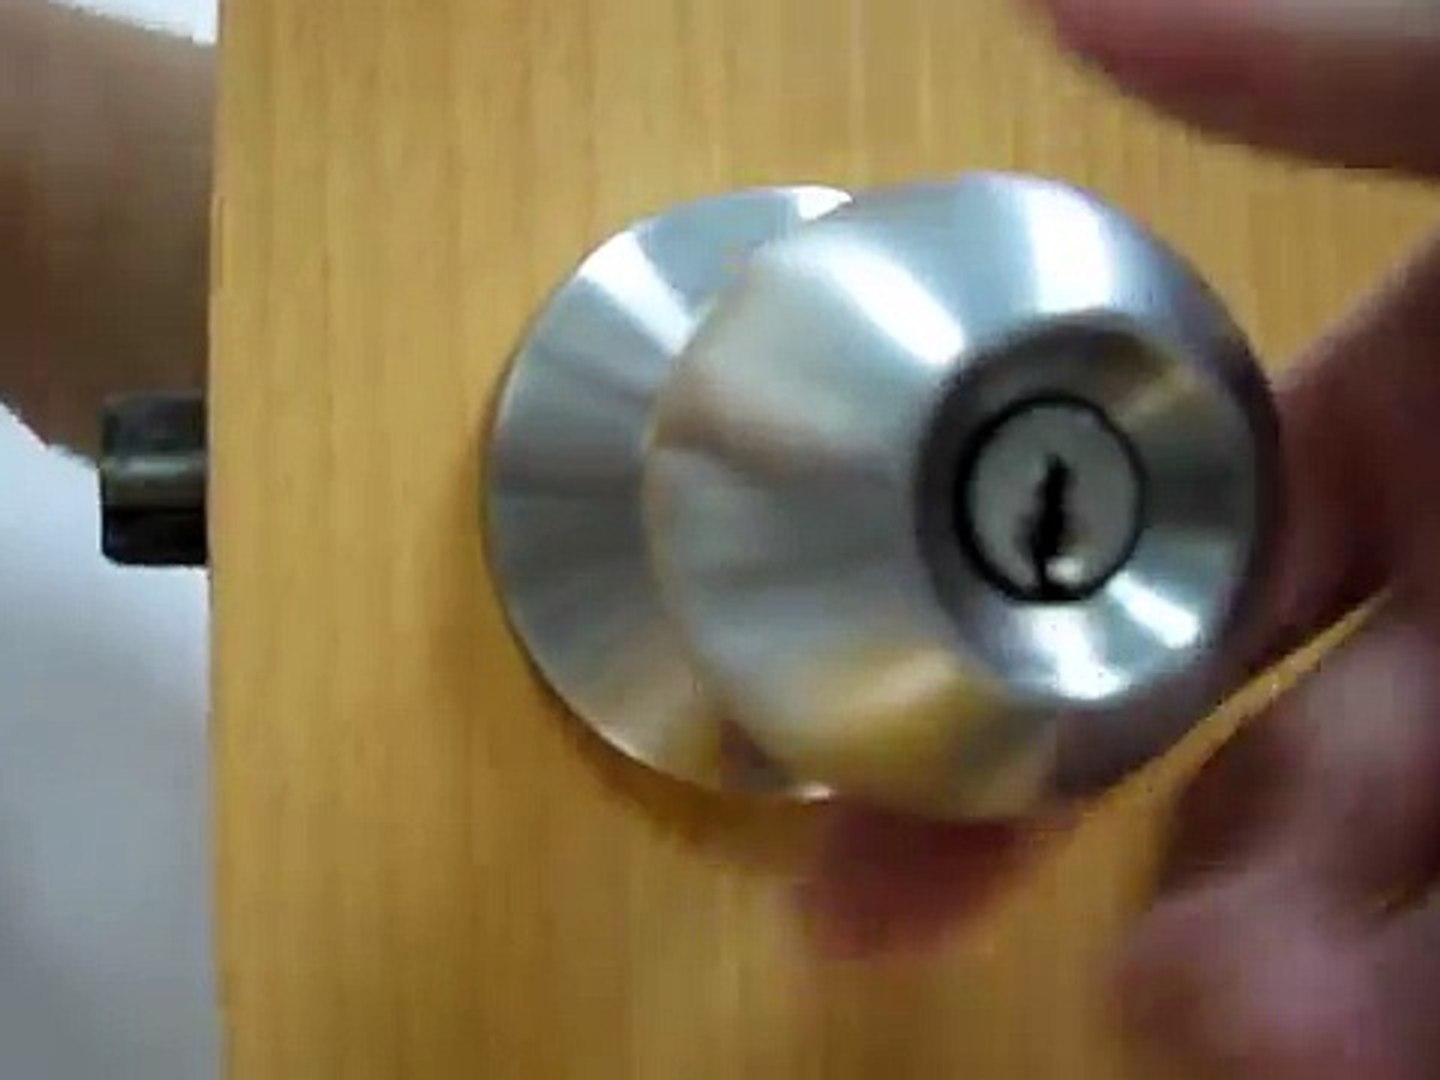 how to pick a door lock with a bobby pin - video Dailymotion